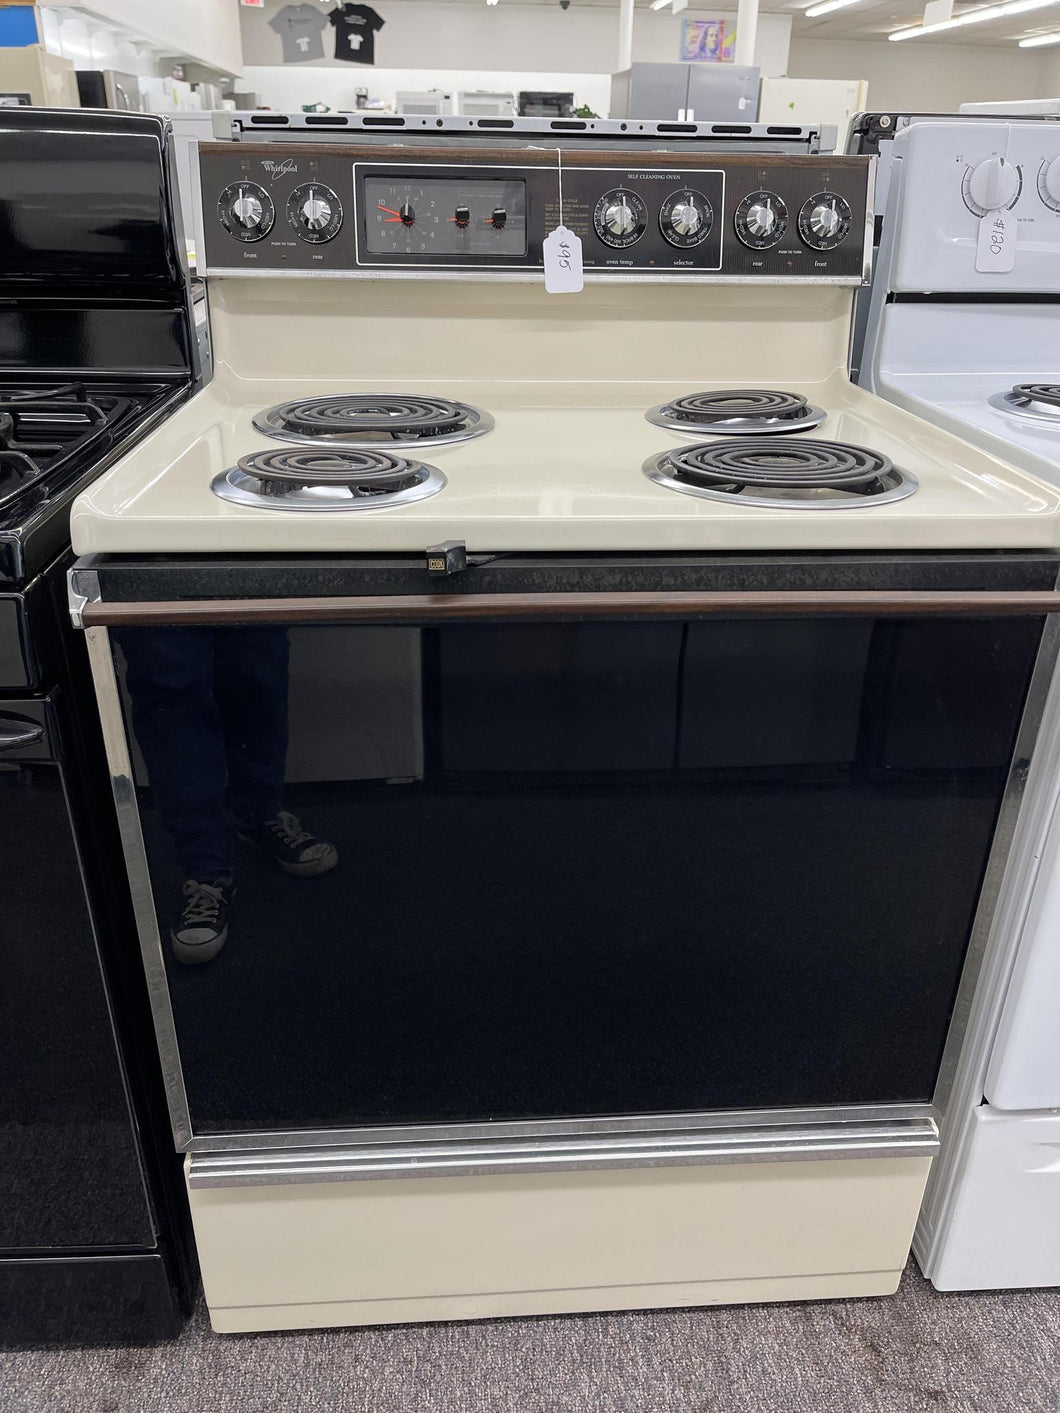 Whirlpool Electric Coil Stove - 5332